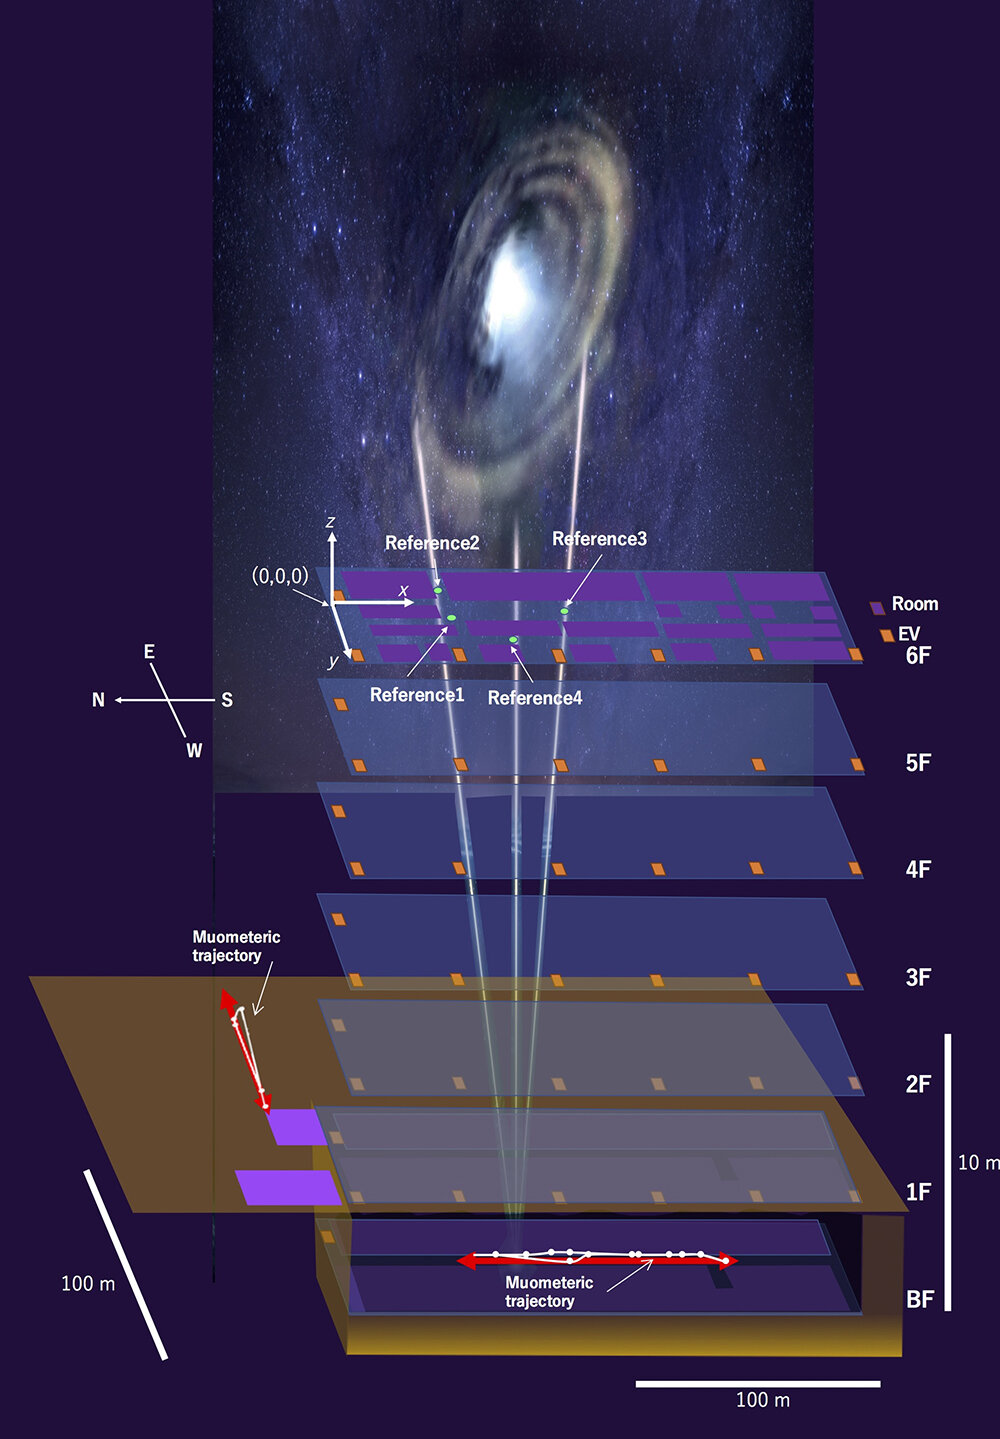 Underground navigation maybe possible with cosmic-ray muons, research shows